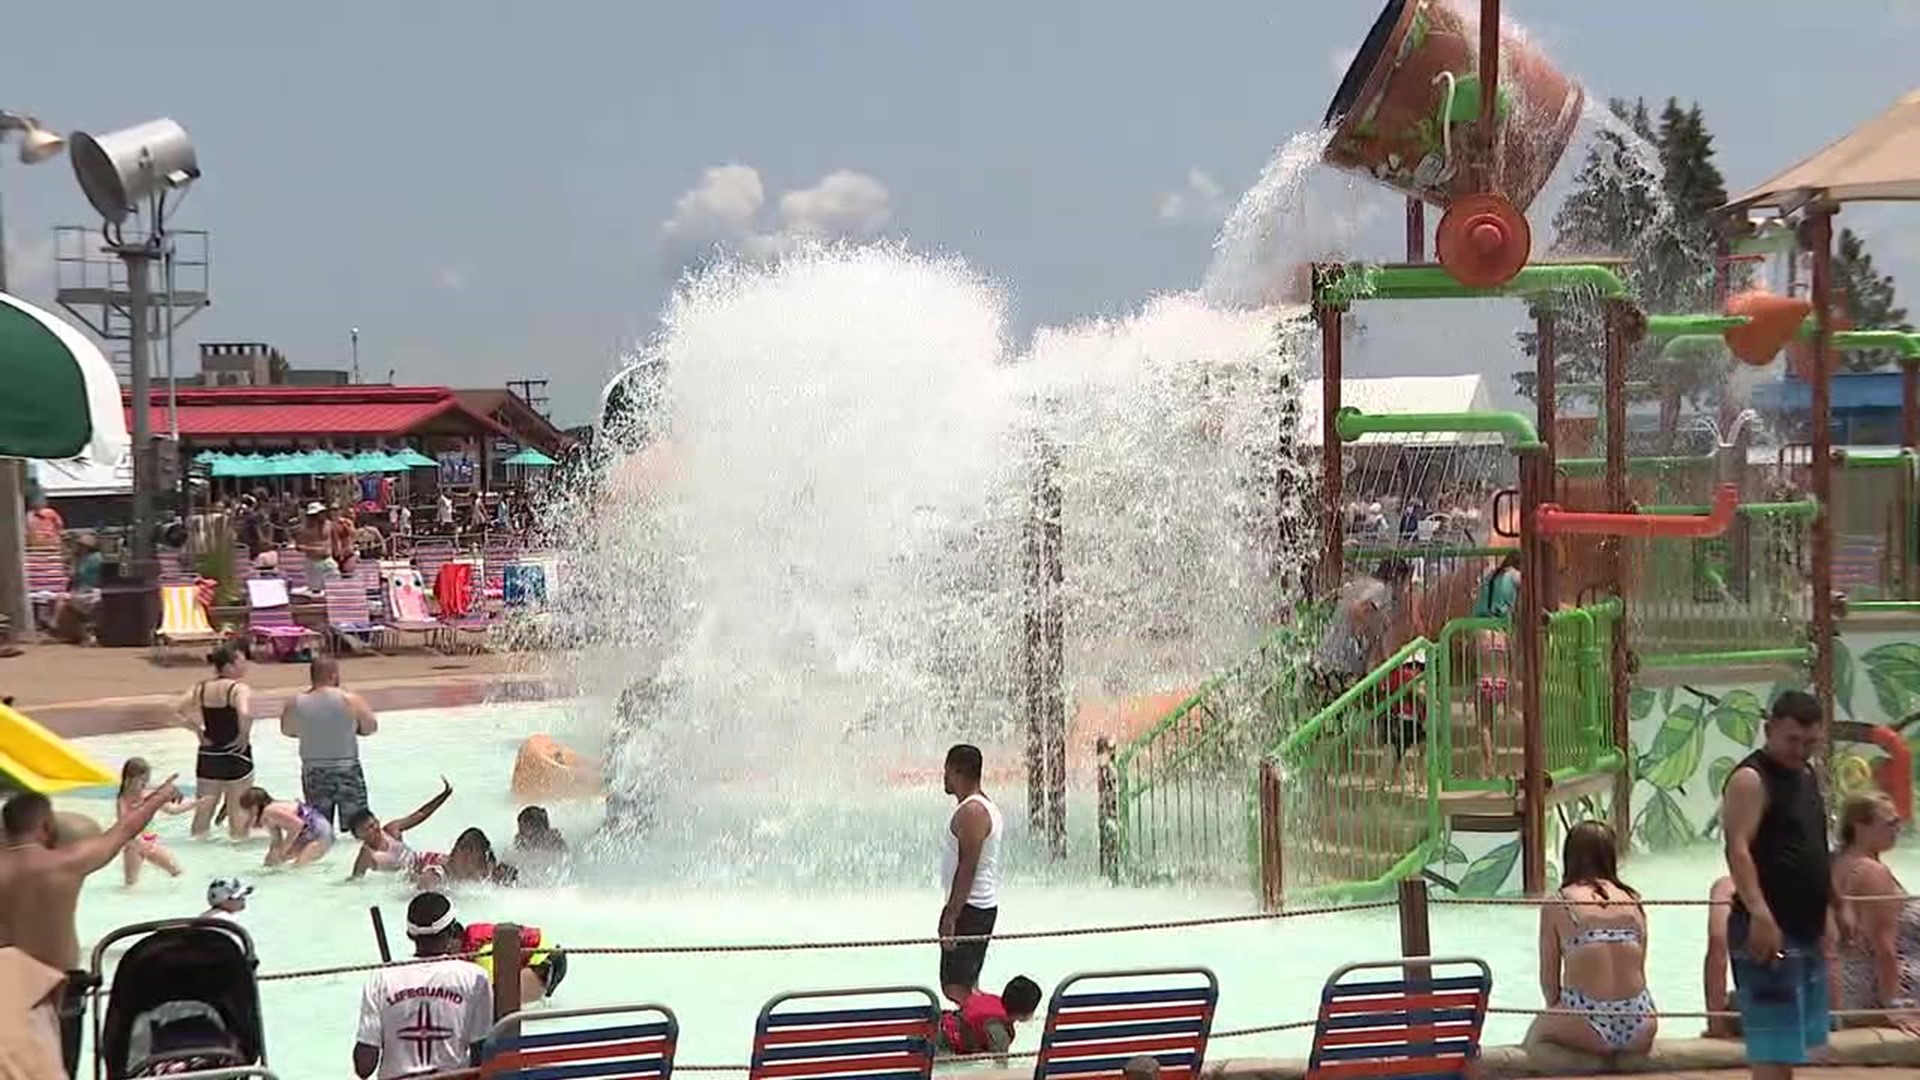 Summery conditions made Camelbeach Mountain Waterpark a popular place to cool off on this holiday.